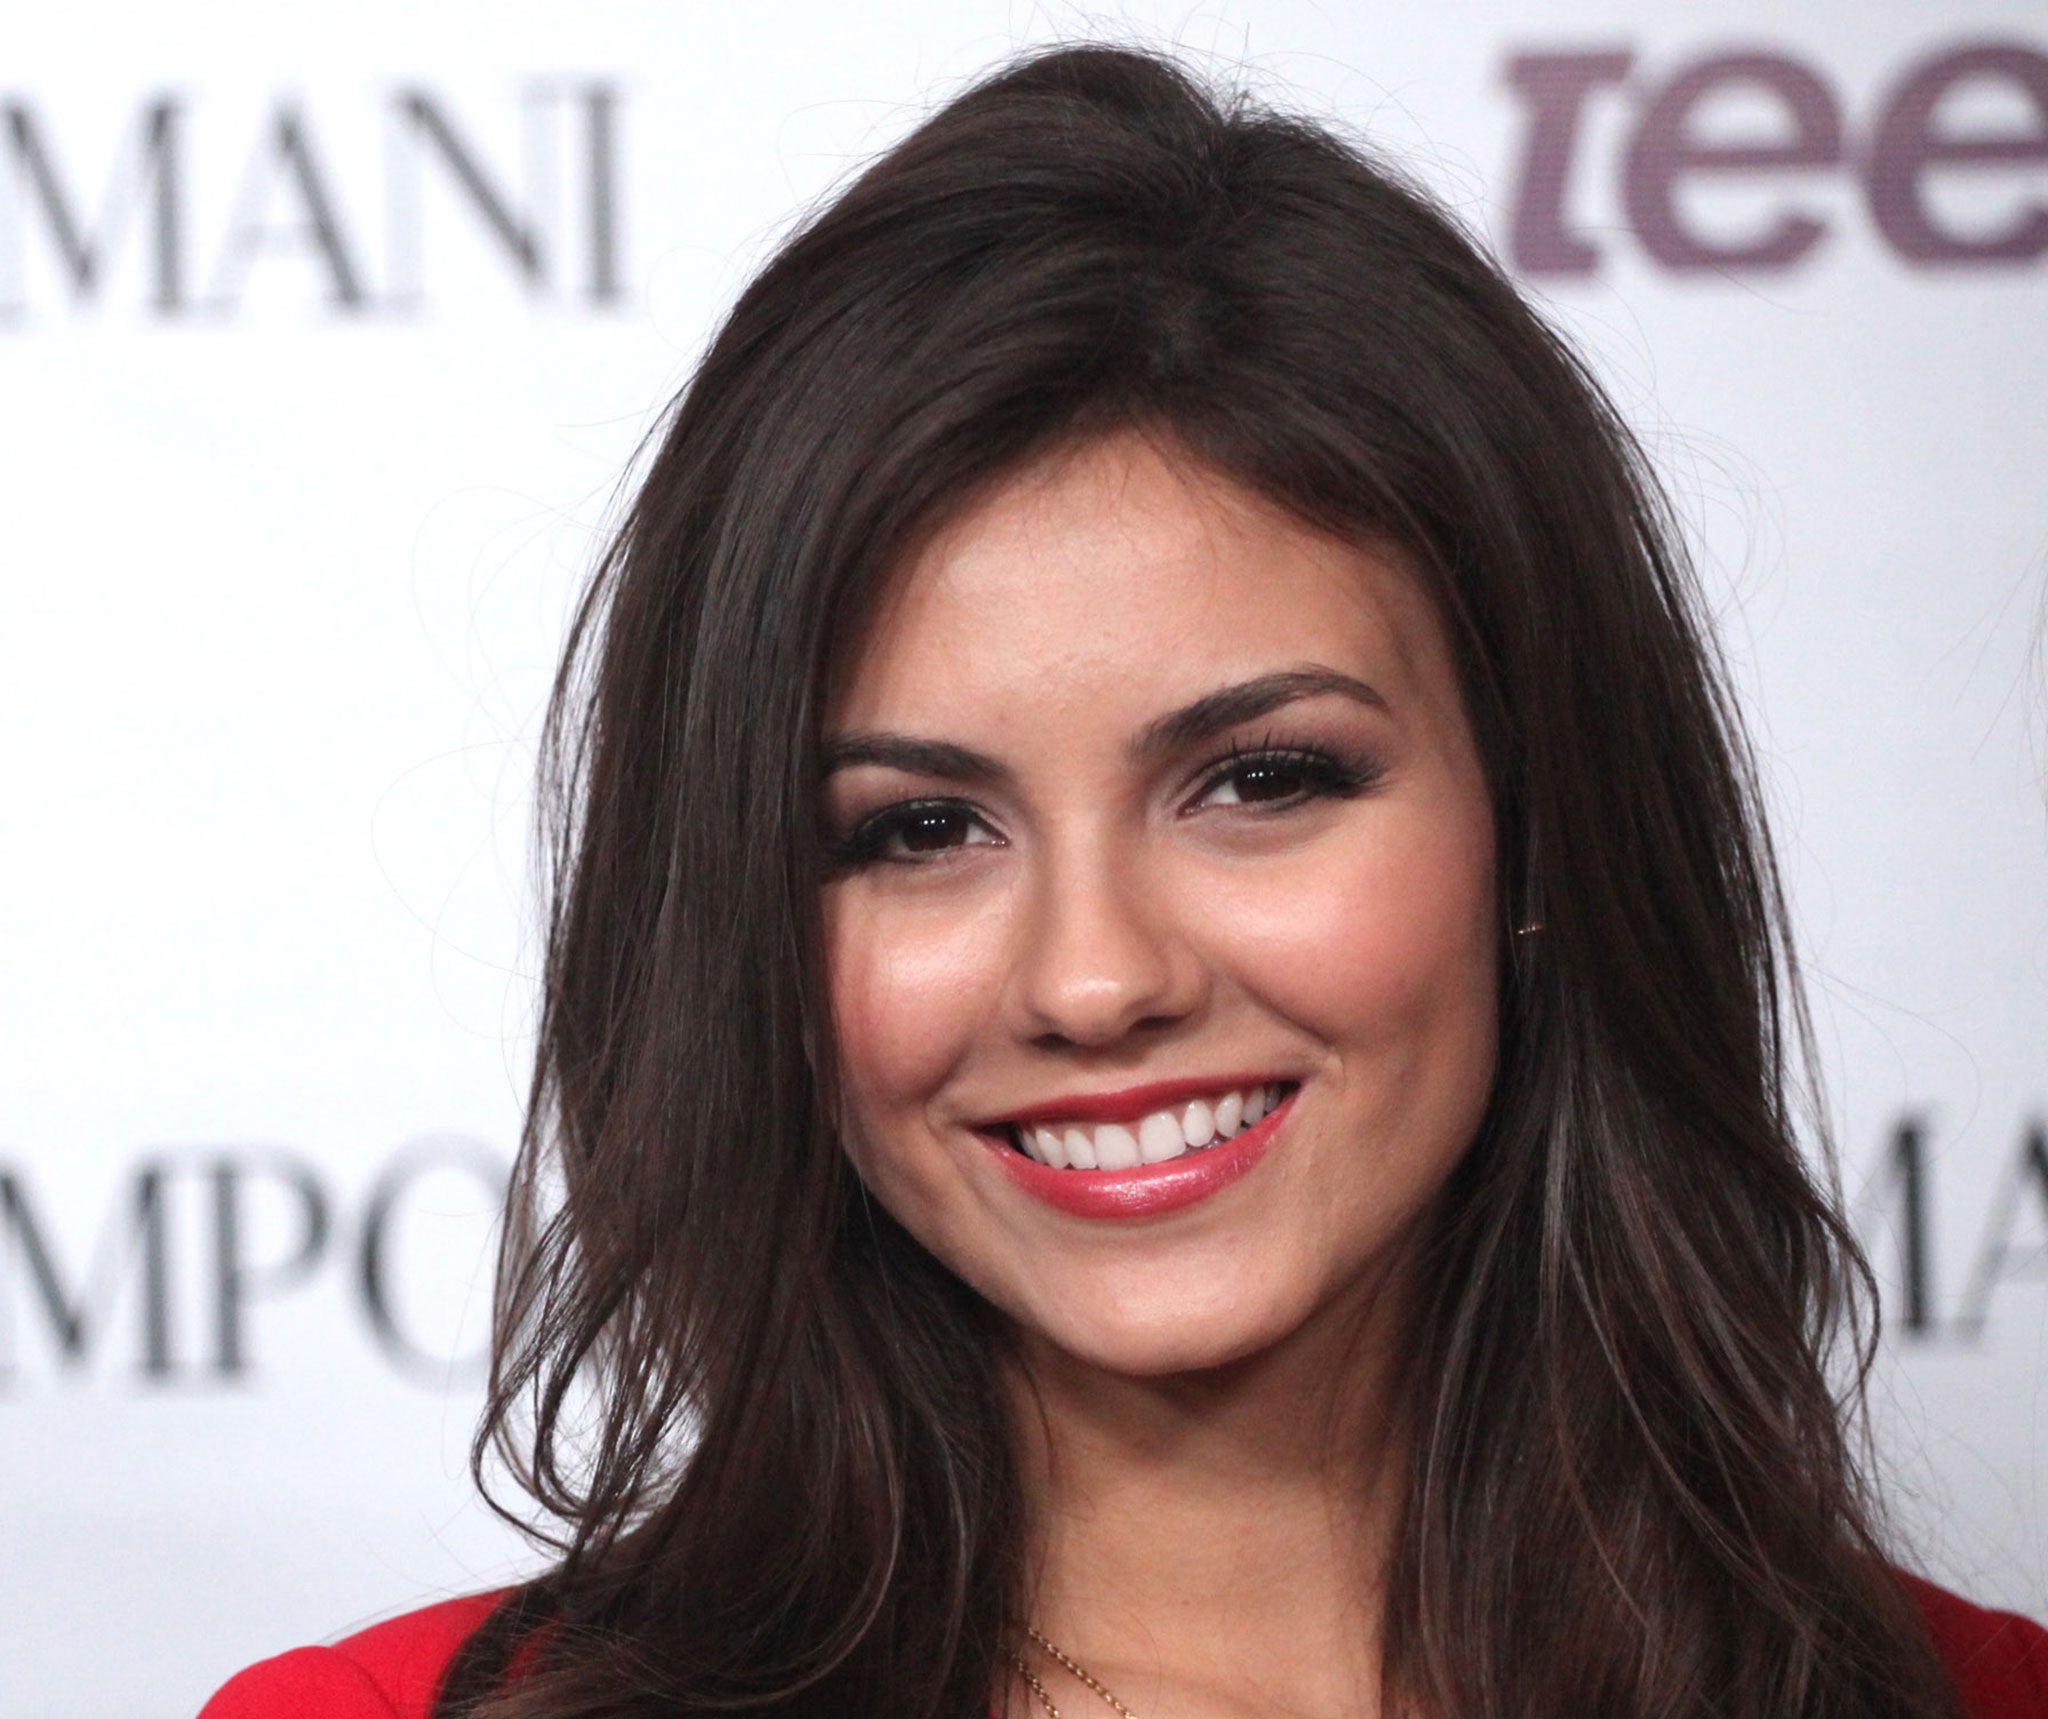 Victoria Justice And Selena Gomez Having Sex - Victoria Justice on nude 4Chan hacker photo leaks: 'Let me ...